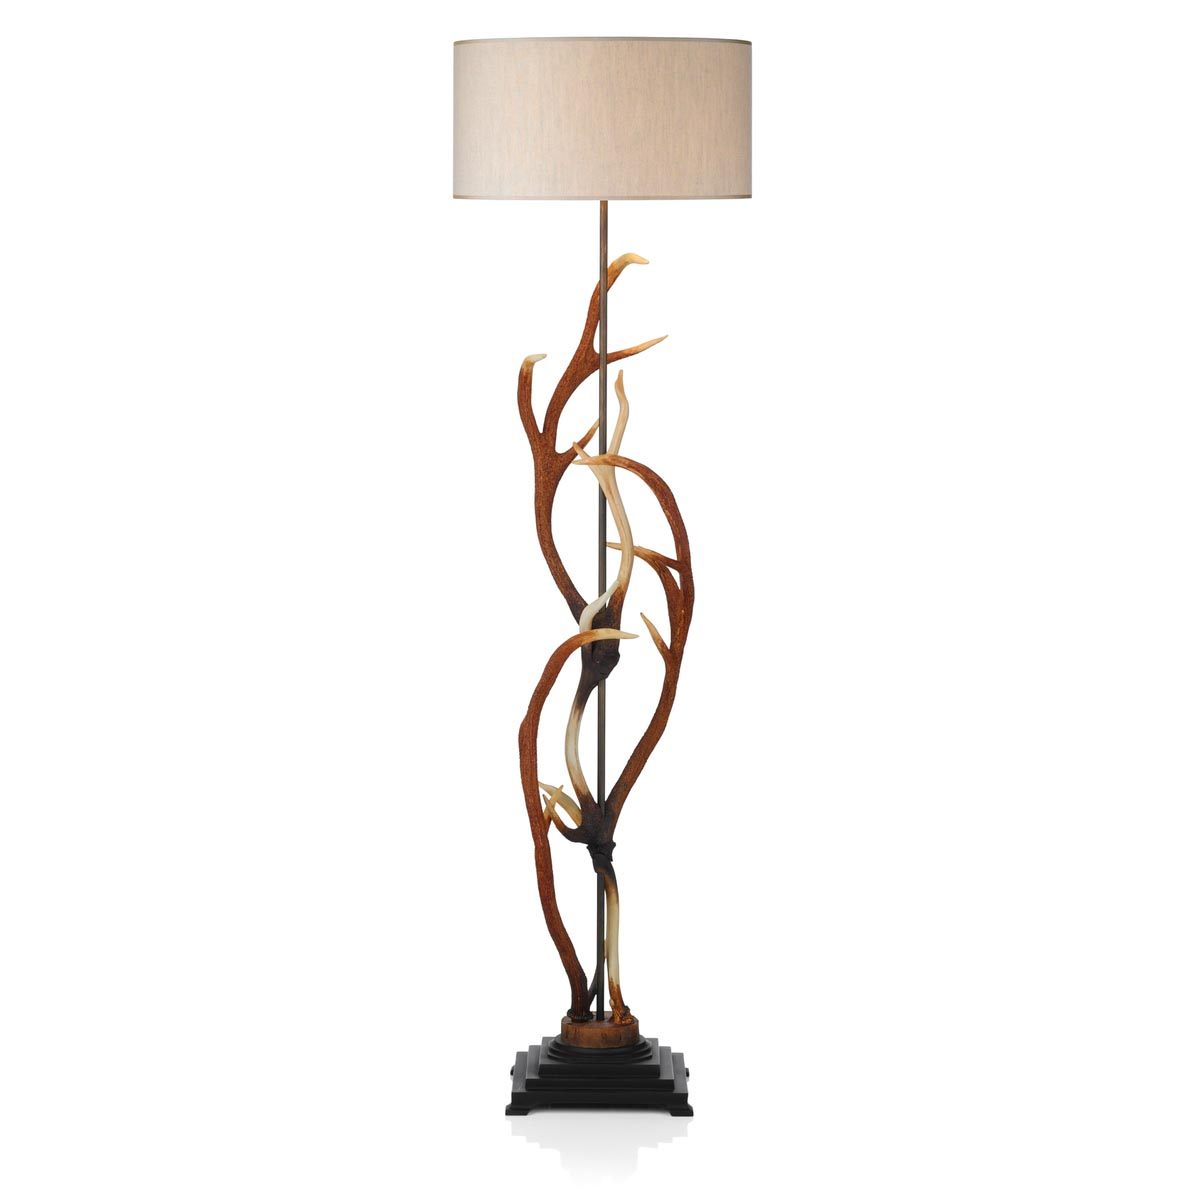 Rustic Floor Lamp With Table Light Fixtures Design Ideas within measurements 1200 X 1200